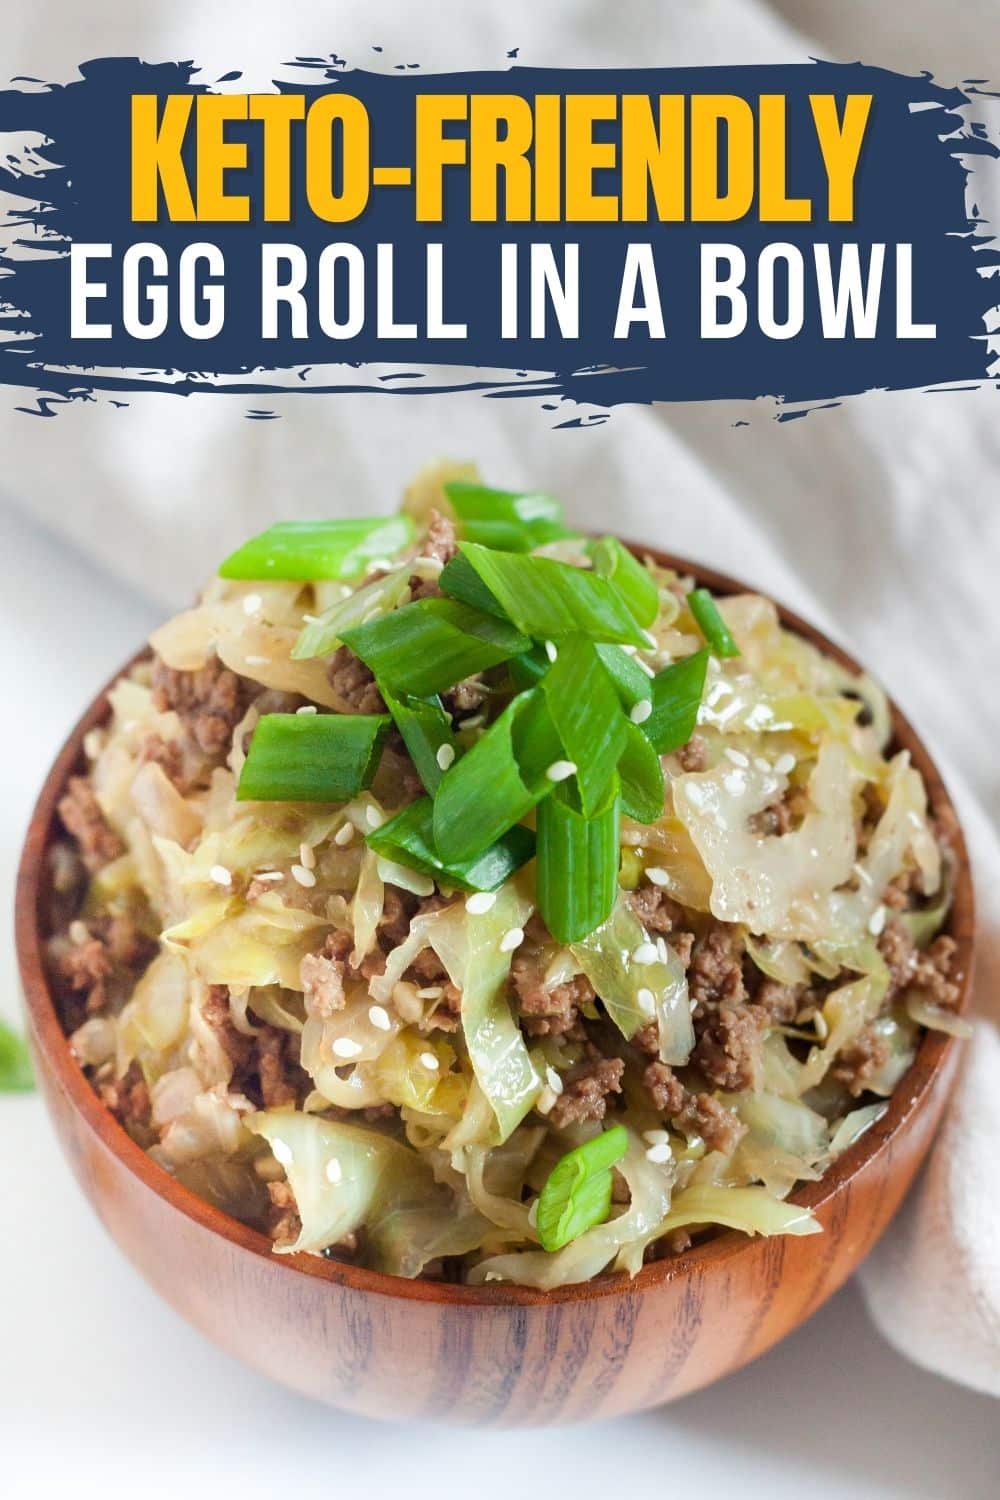 image with keto egg roll in a bowl and yellow and white wording across a blue banner